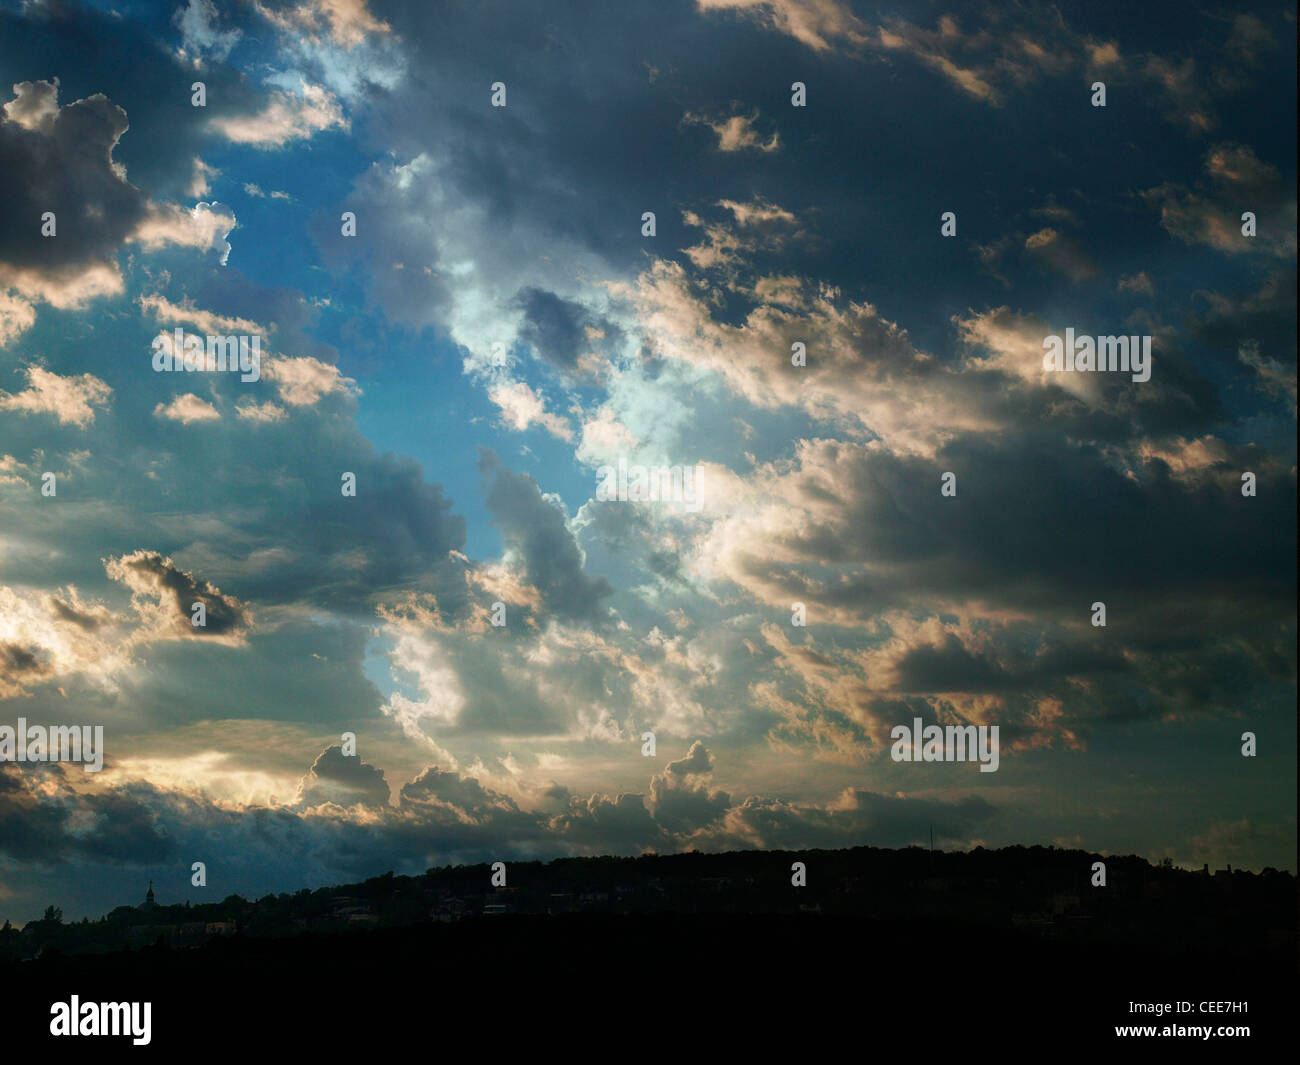 Dramatic sky, beautiful clouds formation, thunderstorm weather Stock Photo